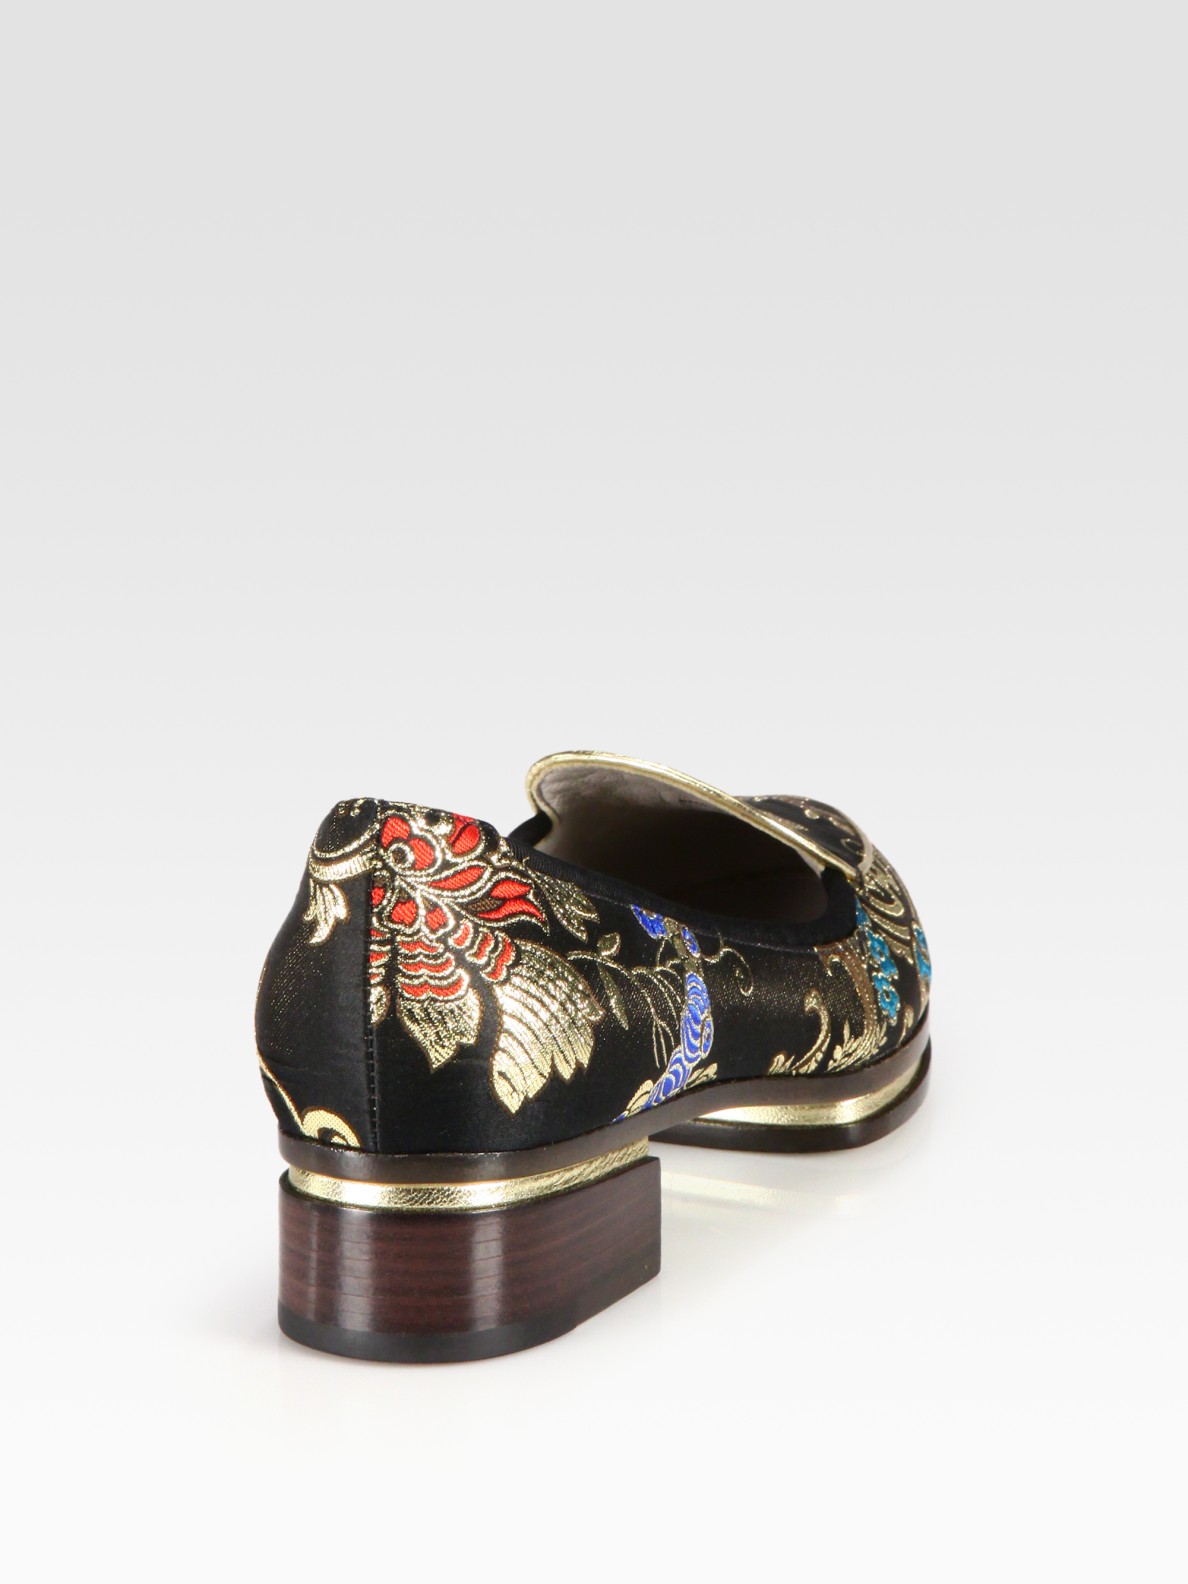 Lyst - Jason wu Brocade and Metallic Leather Stacked Loafers in Black